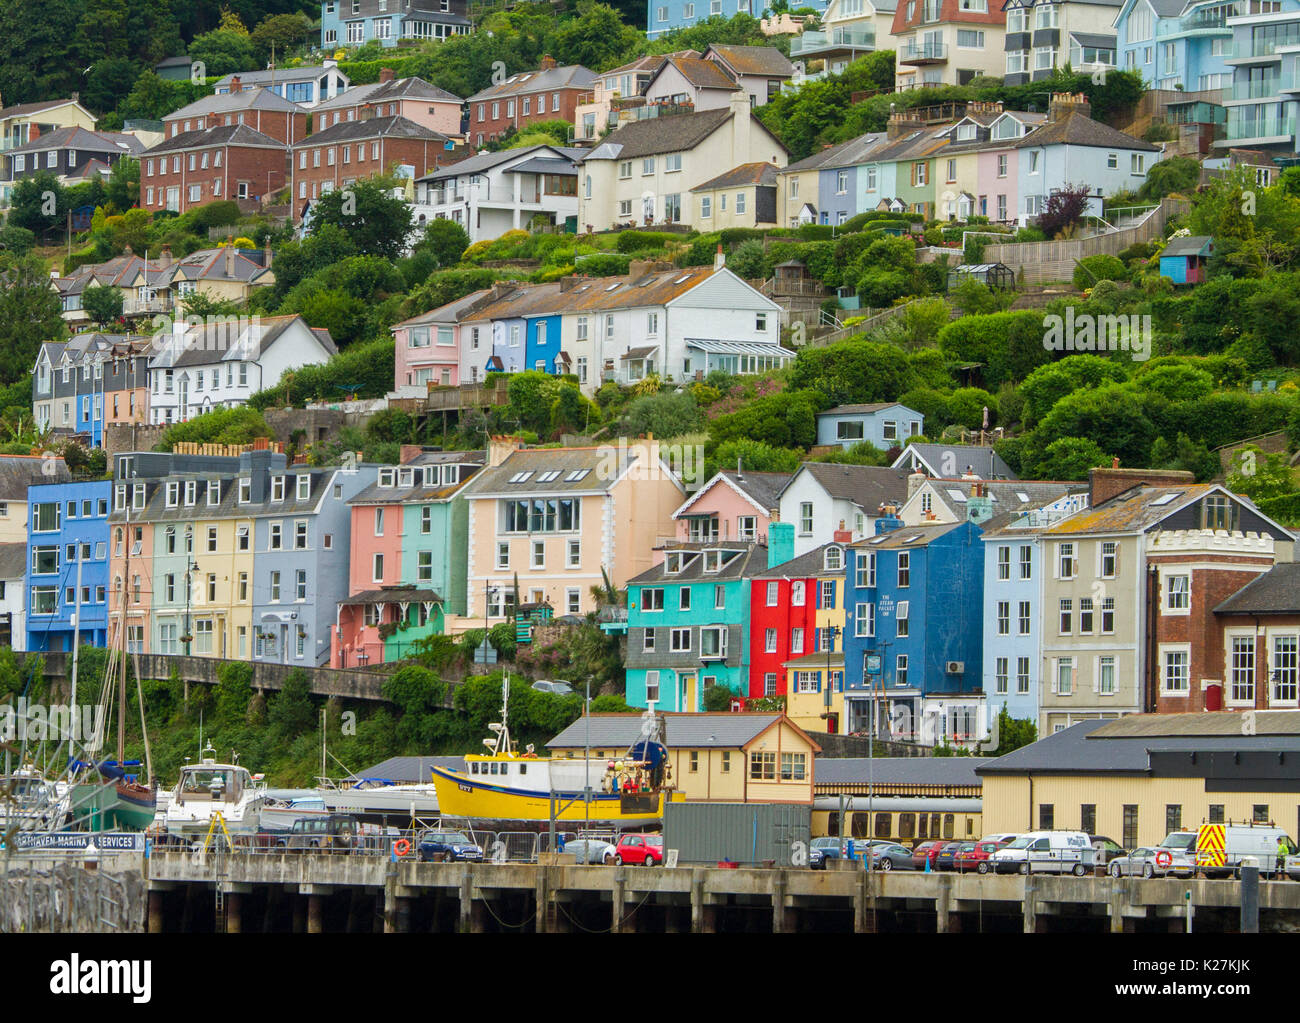 Colourful waterfront buildings in Dartmouth, Devon, England Stock Photo